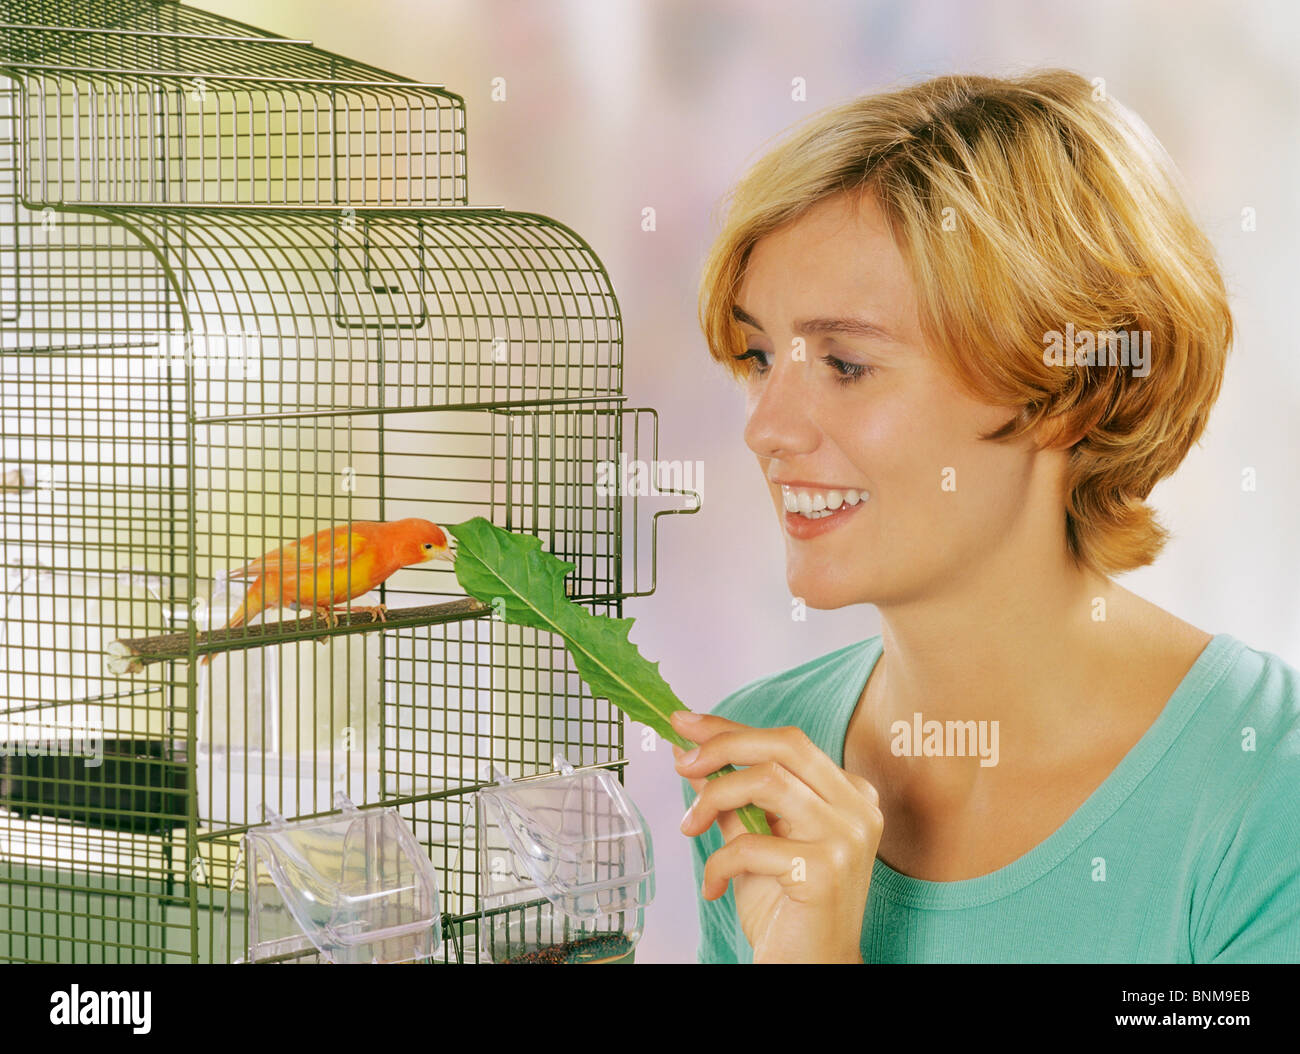 woman feeding a canary in a cage Stock Photo